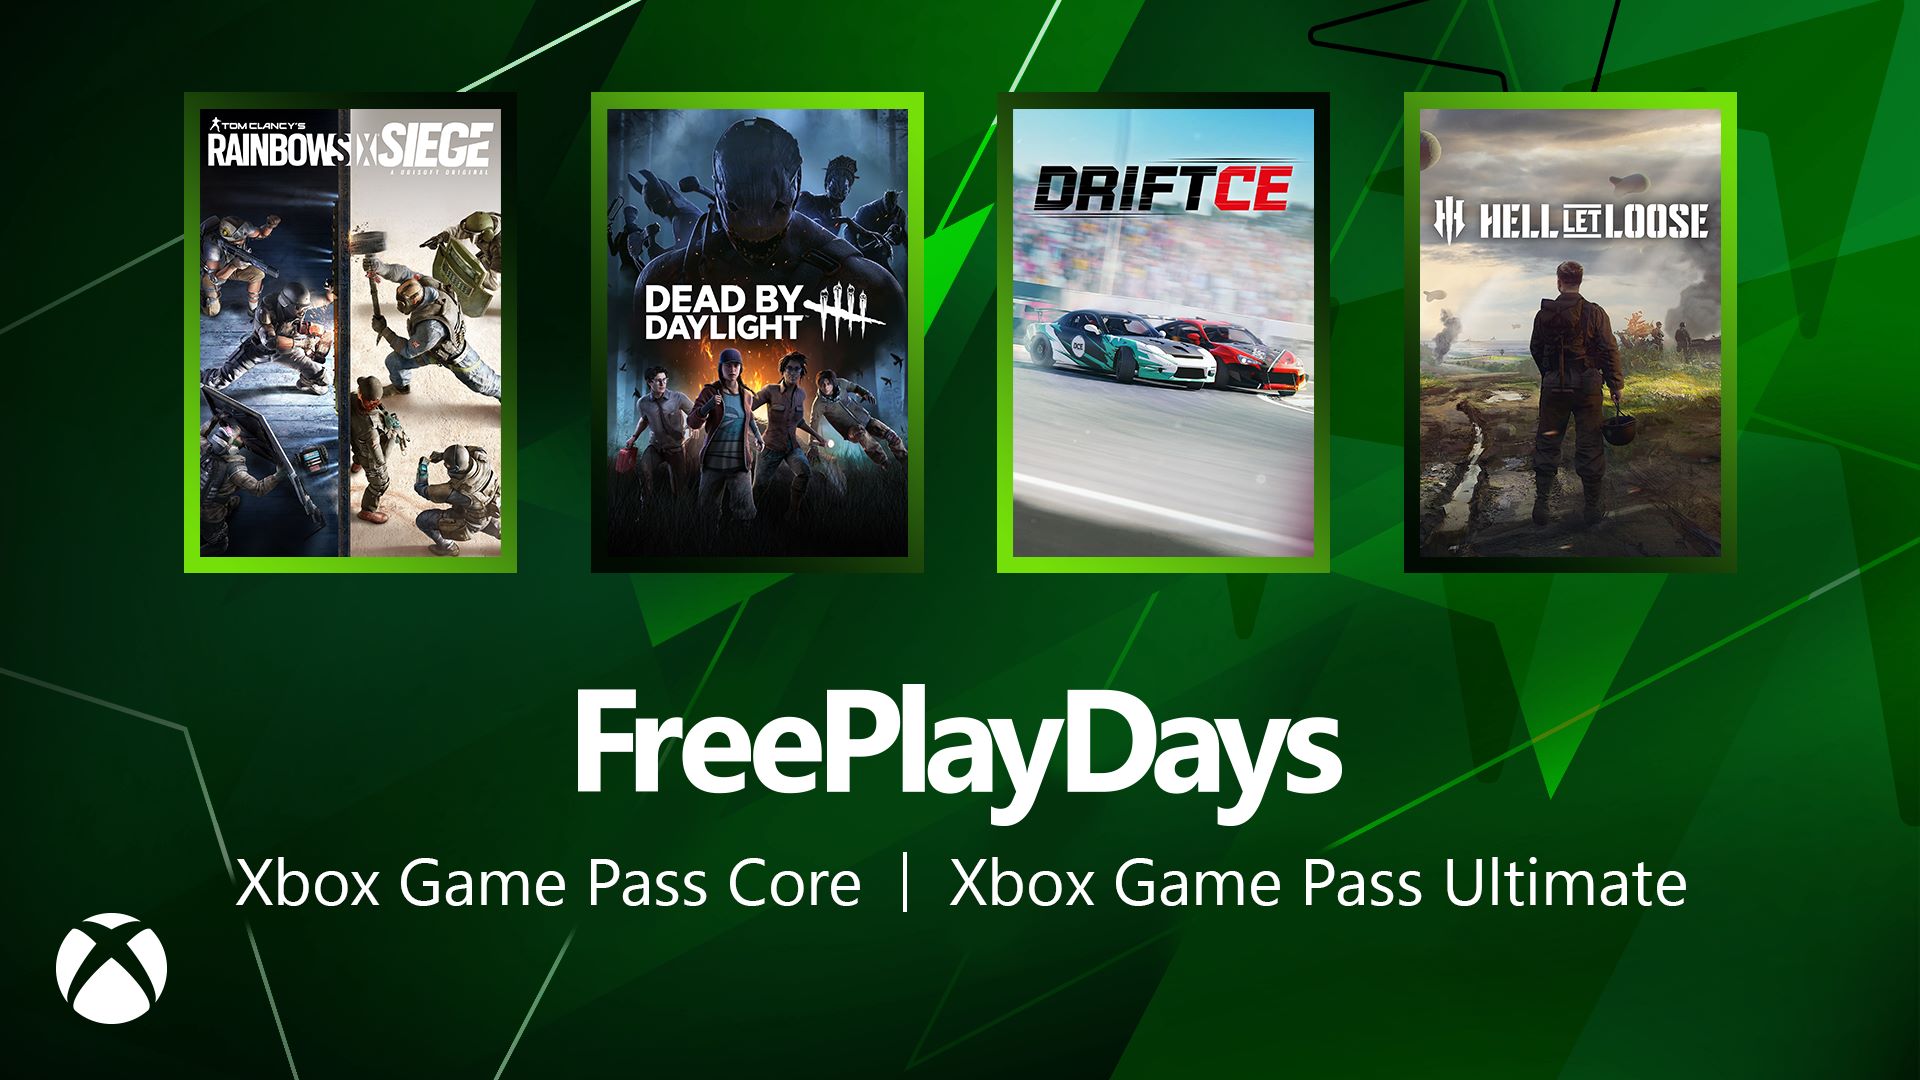 Free Play Days – Rainbow Six Siege, Dead by Daylight, DriftCE and Hell Let Loose